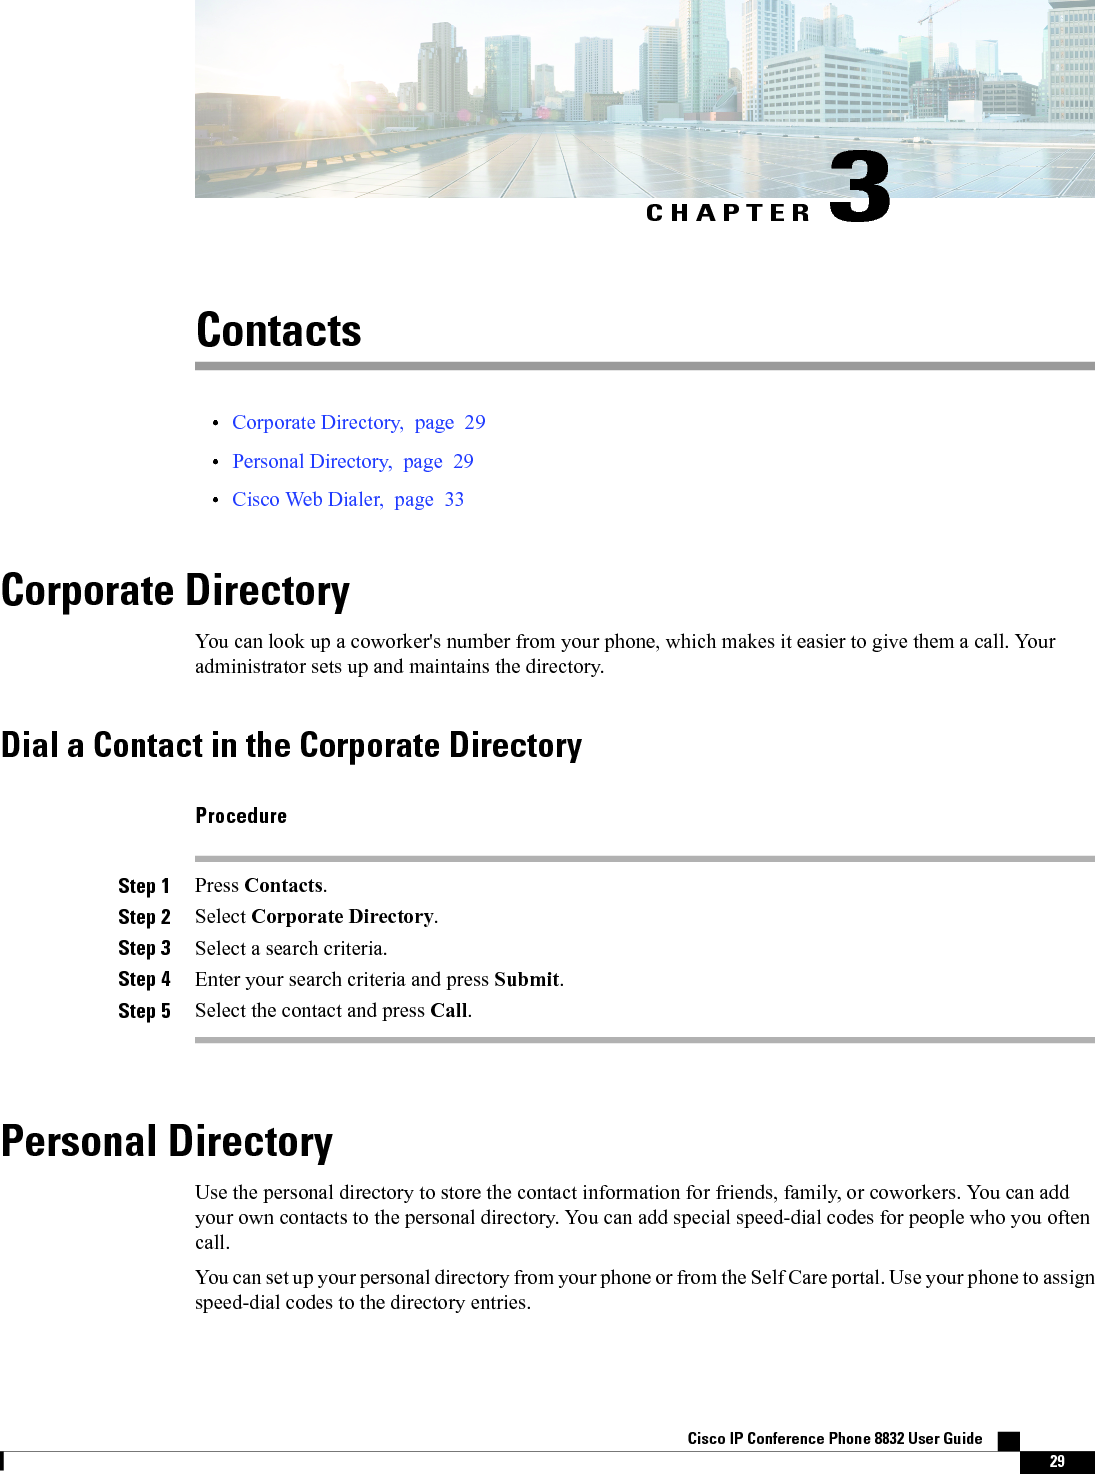 CHAPTER 3Contacts•Corporate Directory, page 29•Personal Directory, page 29•Cisco Web Dialer, page 33Corporate DirectoryYou can look up a coworker&apos;s number from your phone, which makes it easier to give them a call. Youradministrator sets up and maintains the directory.Dial a Contact in the Corporate DirectoryProcedureStep 1 Press Contacts.Step 2 Select Corporate Directory.Step 3 Select a search criteria.Step 4 Enter your search criteria and press Submit.Step 5 Select the contact and press Call.Personal DirectoryUse the personal directory to store the contact information for friends, family, or coworkers. You can addyour own contacts to the personal directory. You can add special speed-dial codes for people who you oftencall.You can set up your personal directory from your phone or from the Self Care portal. Use your phone to assignspeed-dial codes to the directory entries.Cisco IP Conference Phone 8832 User Guide    29